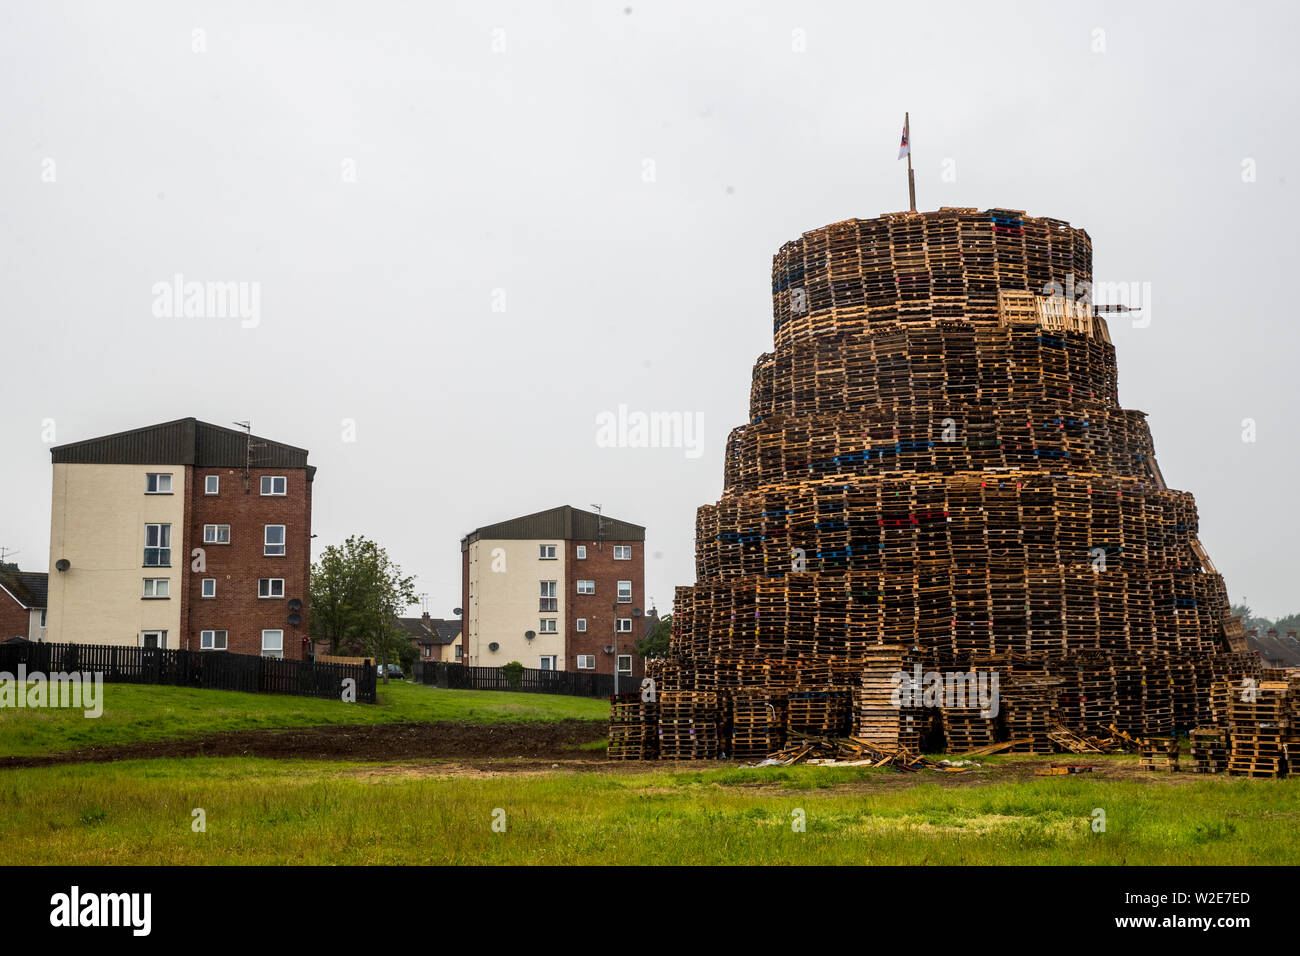 Loyalists in the Redmanville area of Portadown continue to build their traditional 11th night bonfire as part of the 12th of July celebrations. Residents in nearby flats received a letter from the South Ulster Housing Association (SUHA) advising them that the bonfire poses a serious health and safety risk, with a risk to damage of occupants property, and were offered alternative accommodation for a night in the Armagh City Youth Hostel. Stock Photo